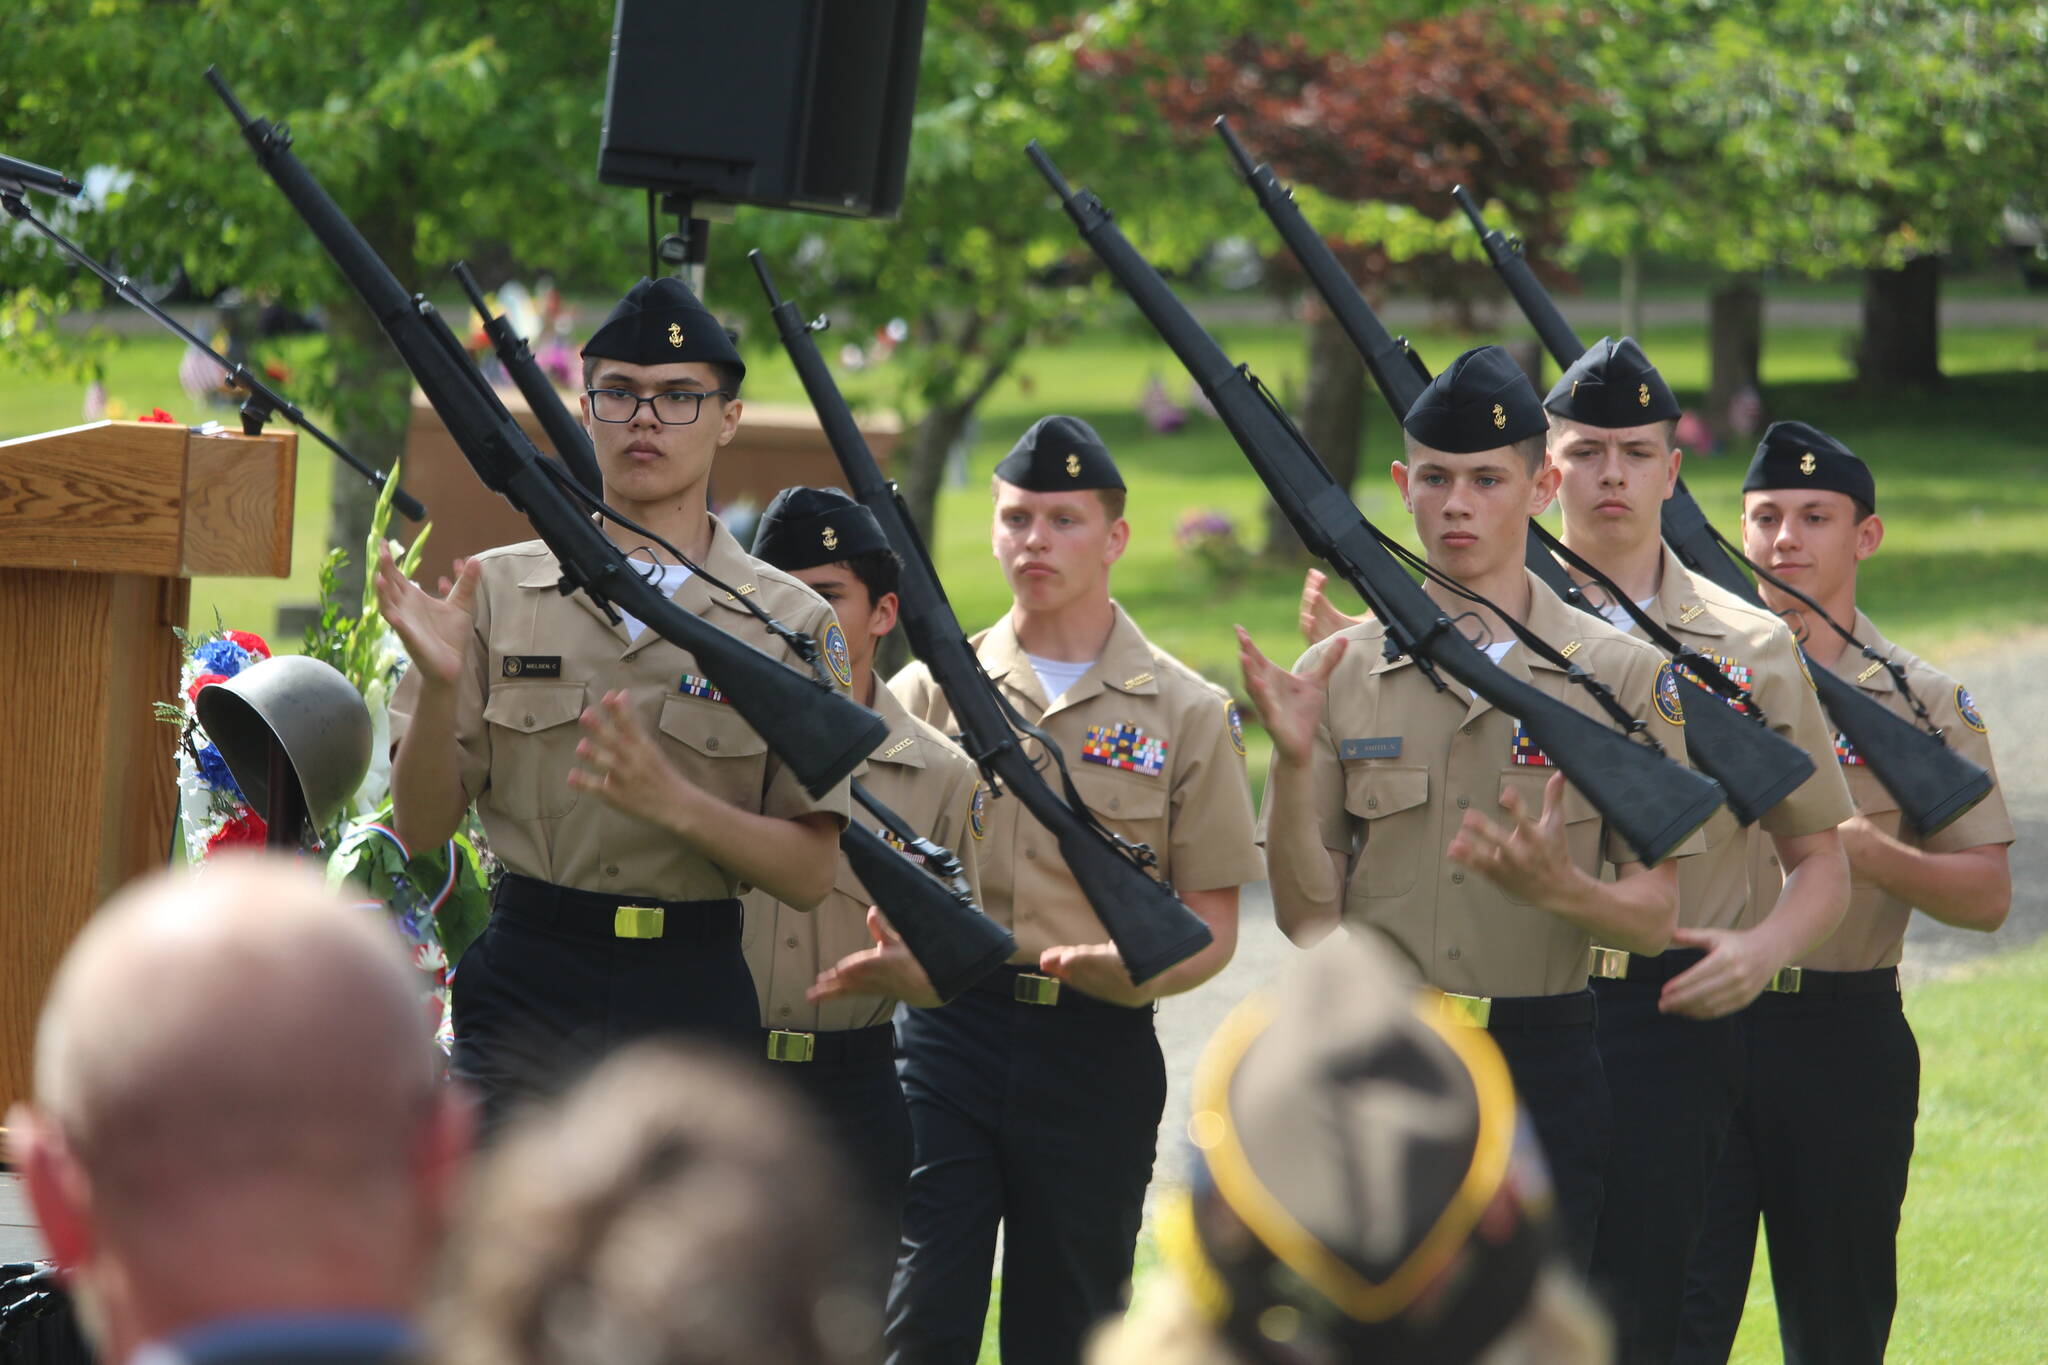 Photo by Karina Andrew/Whidbey News-Times
Oak Harbor High School's NJROTC armed drill team performs at Maple Leaf Cemetery on Memorial Day.